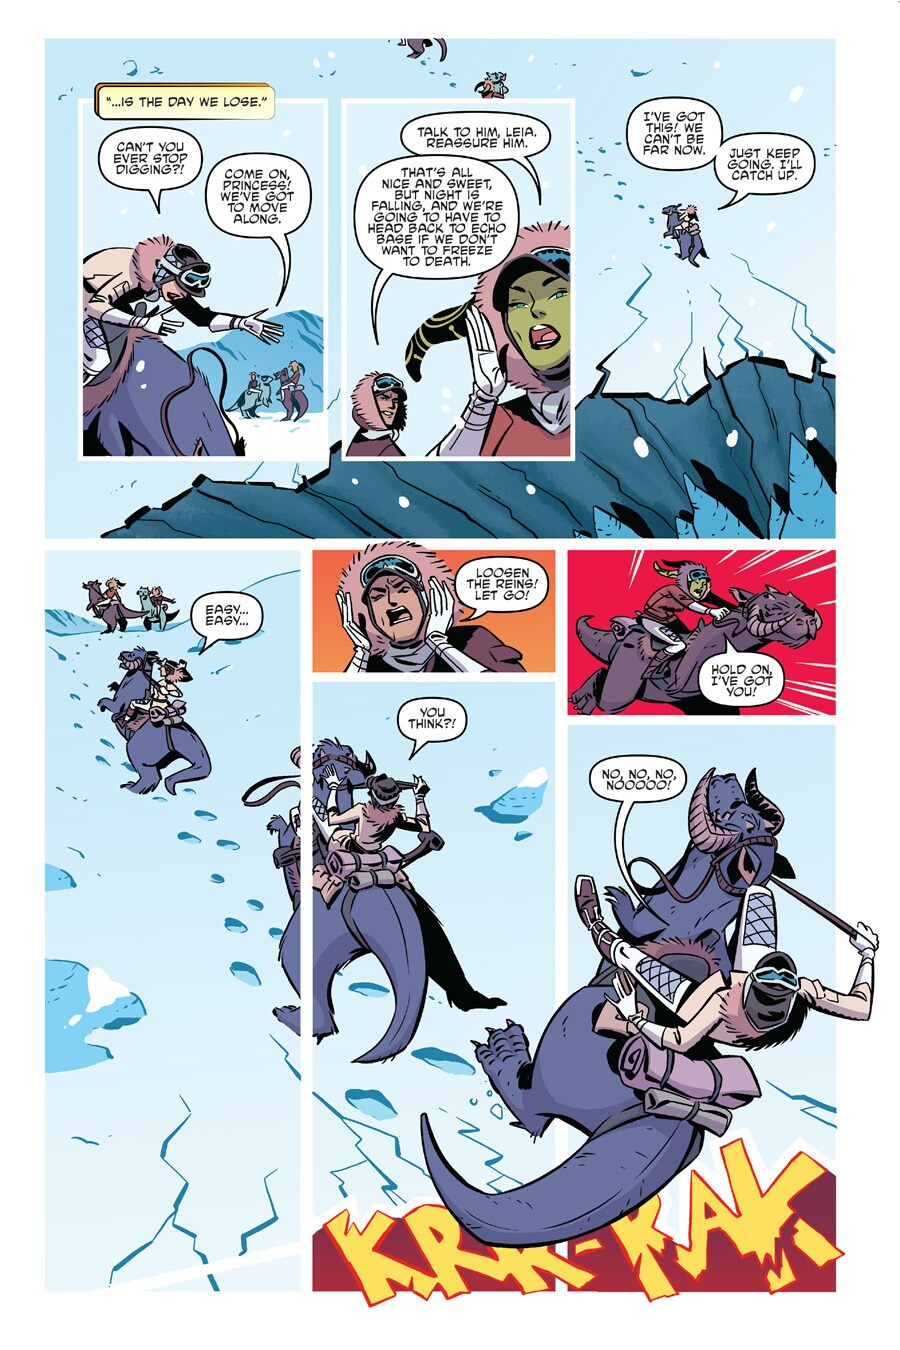 Princess Leia rides a Taunton on Hoth and bickers with Han Solo in a page from the comic book Star Wars Forces of Destiny: Leia.